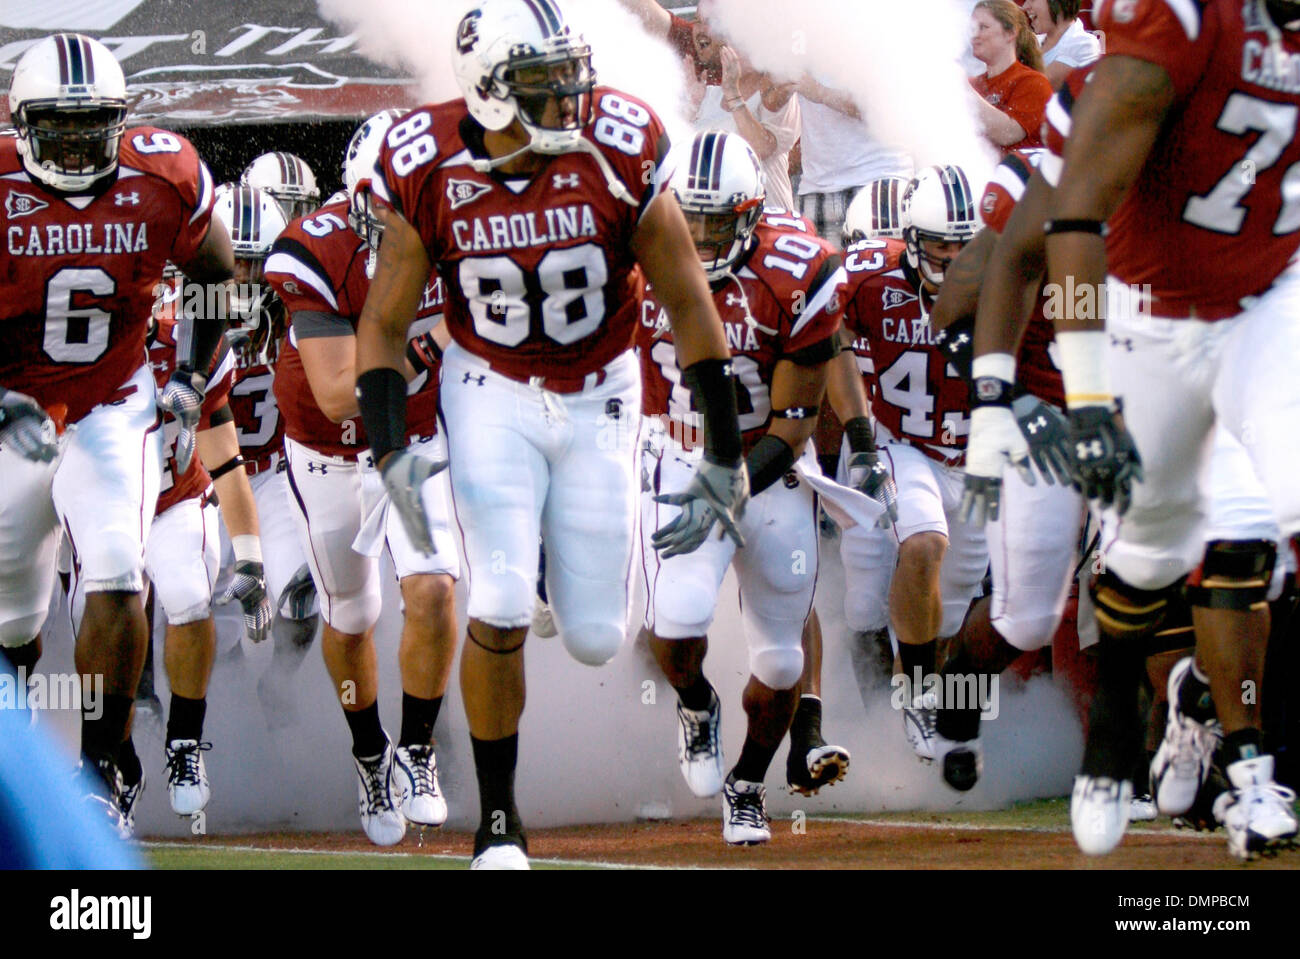 Oct. 05, 2009 - Columbia, South Carolina, U.S - 03 October 2009: The Gamecocks take the field prior to their game against SC State. (Credit Image: © Frankie Creel/Southcreek Global/ZUMApress.com) Stock Photo